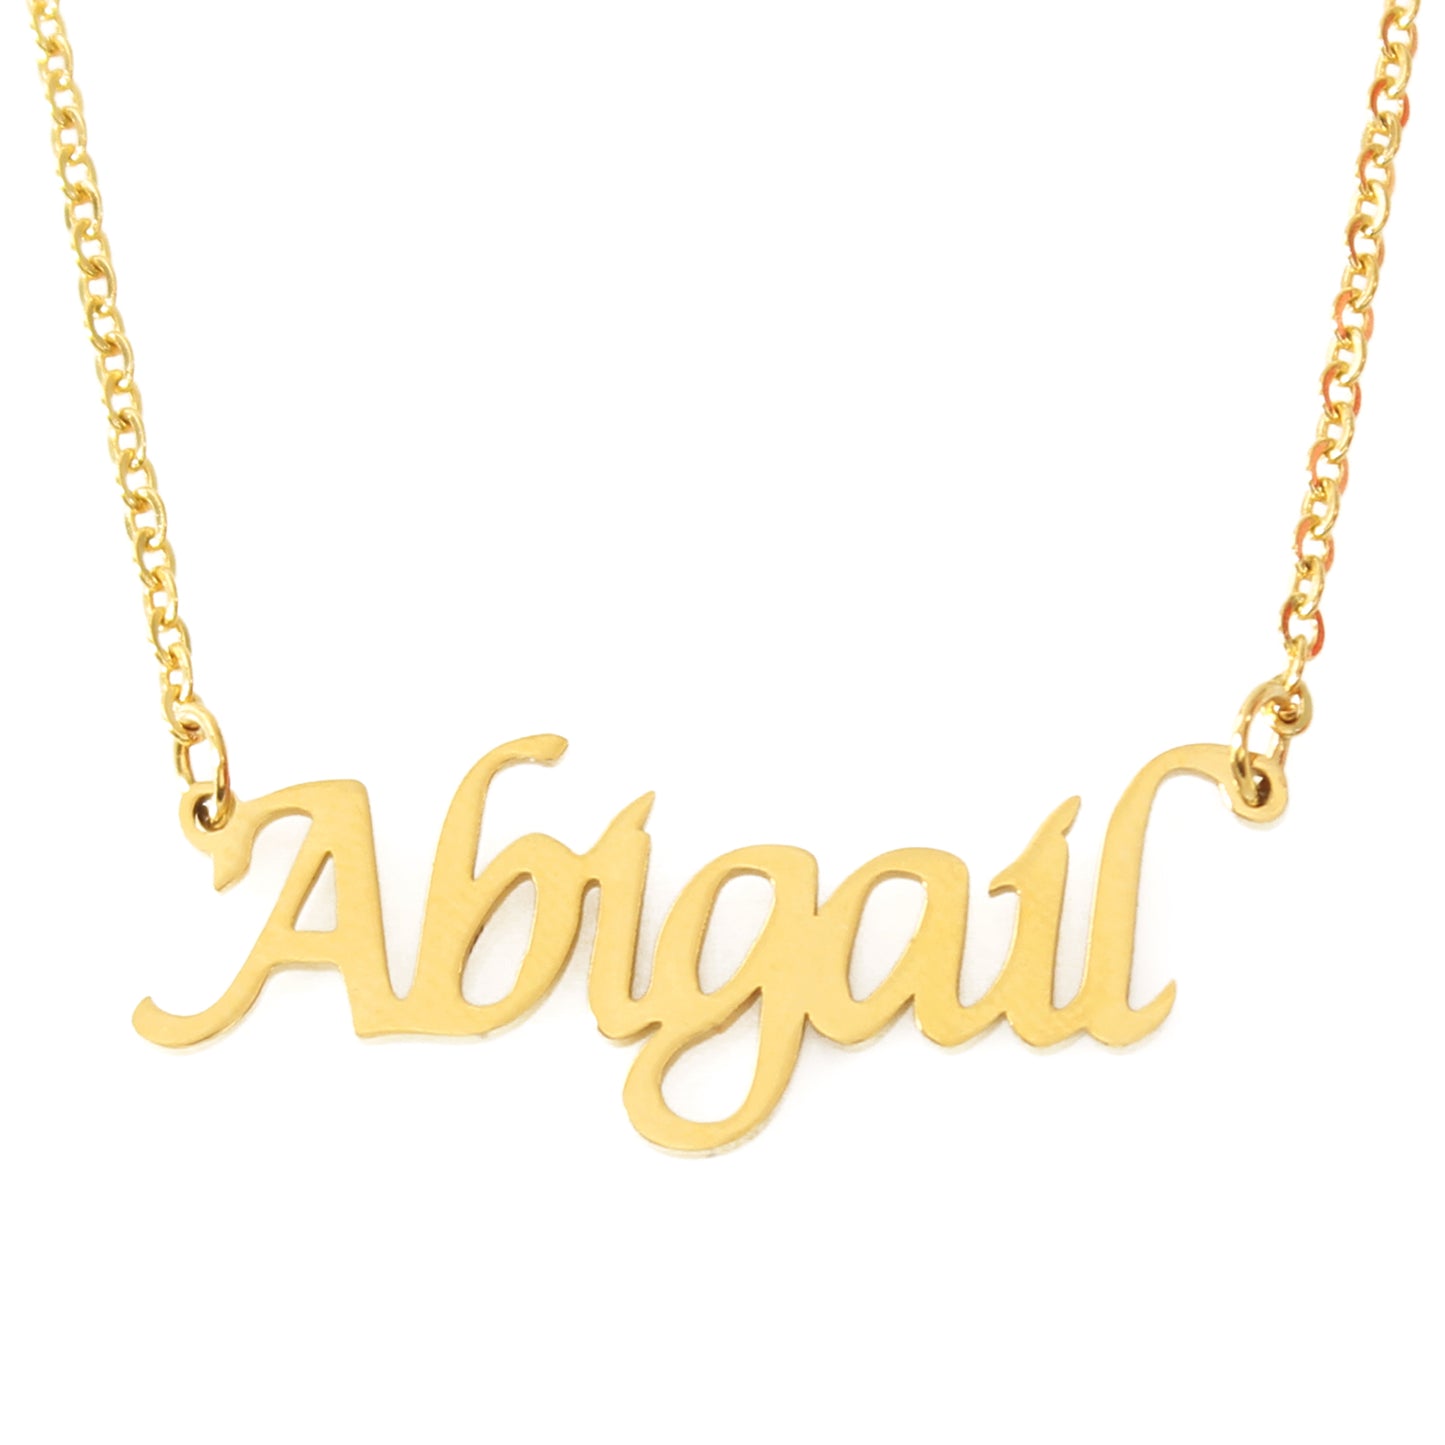 Abigail Name Necklace